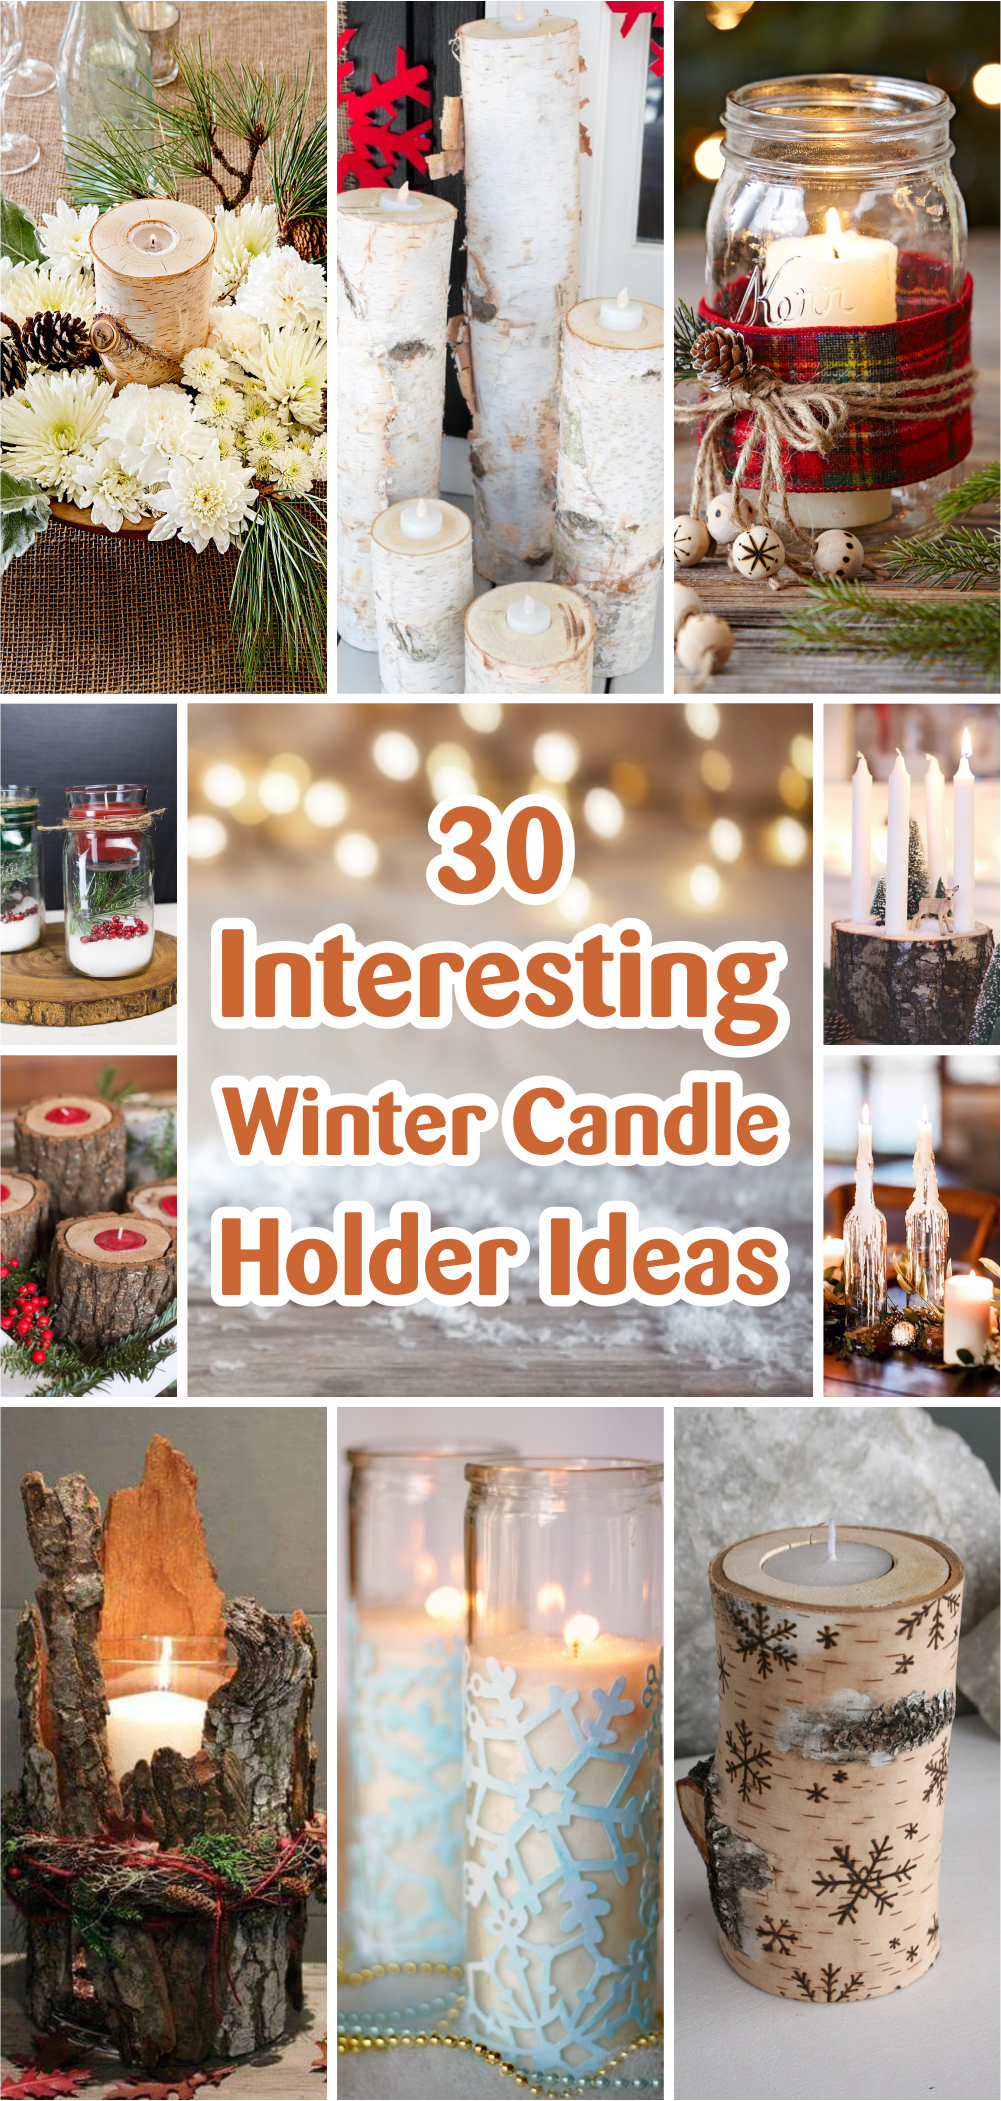 30 interesting winter candle holder ideas1